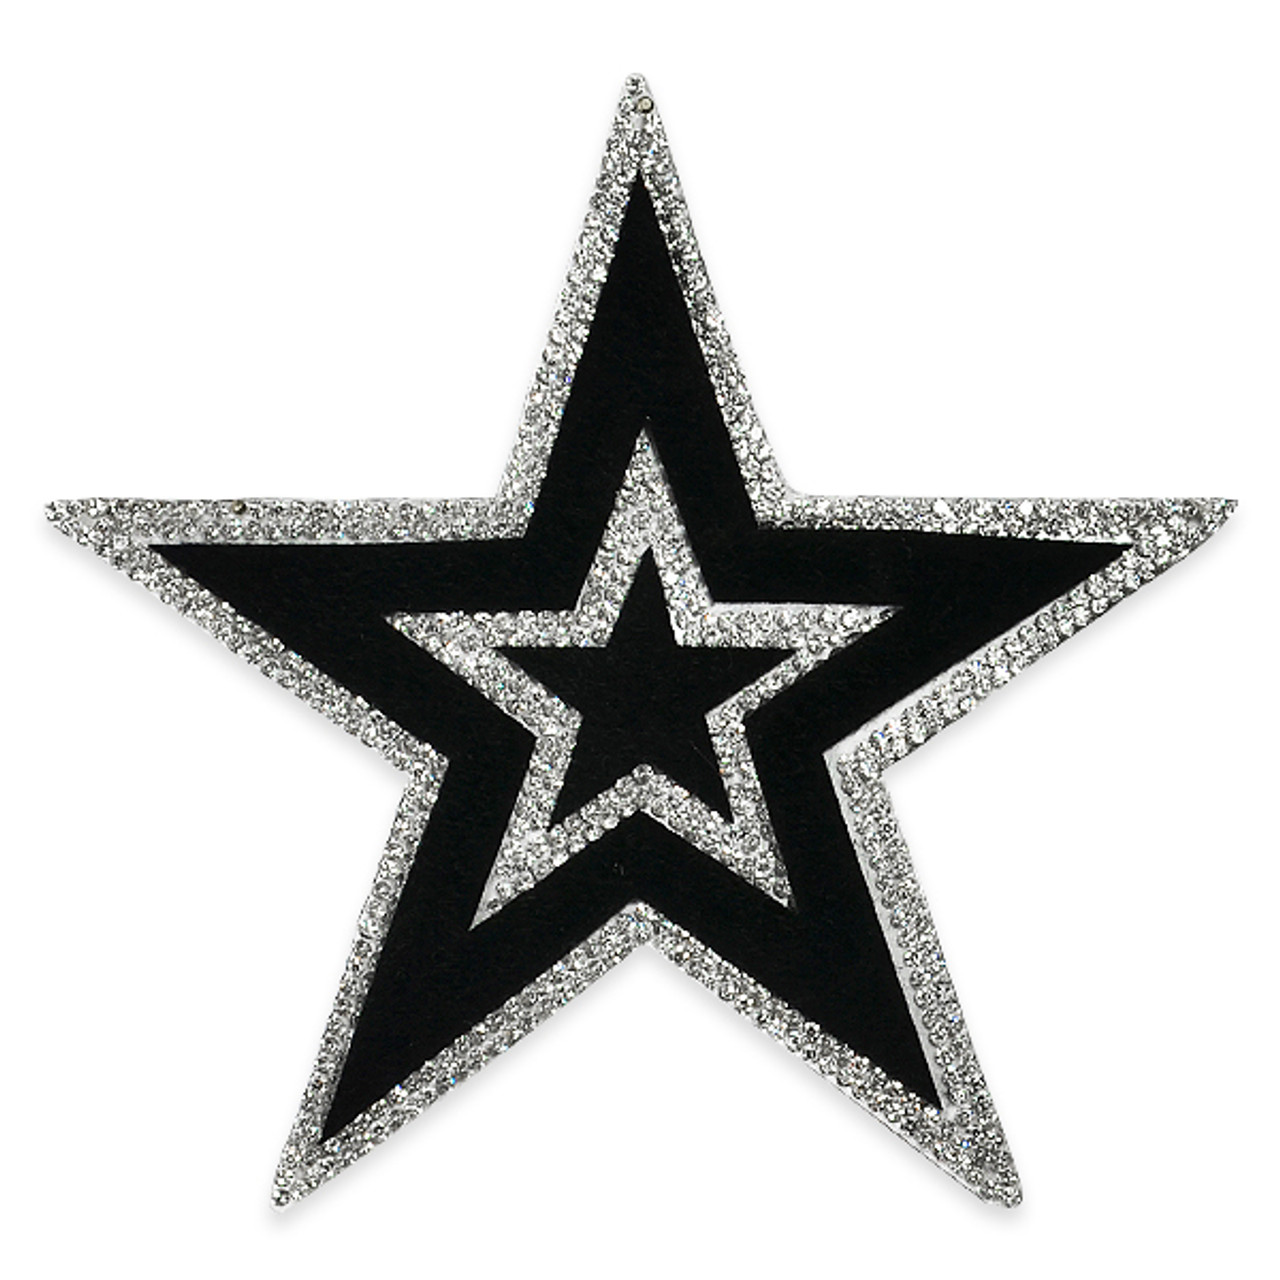 Dallas Star Embroidered Patch Appliqué. Iron On, Black with White Satin.  Size 2.4 (63mm)